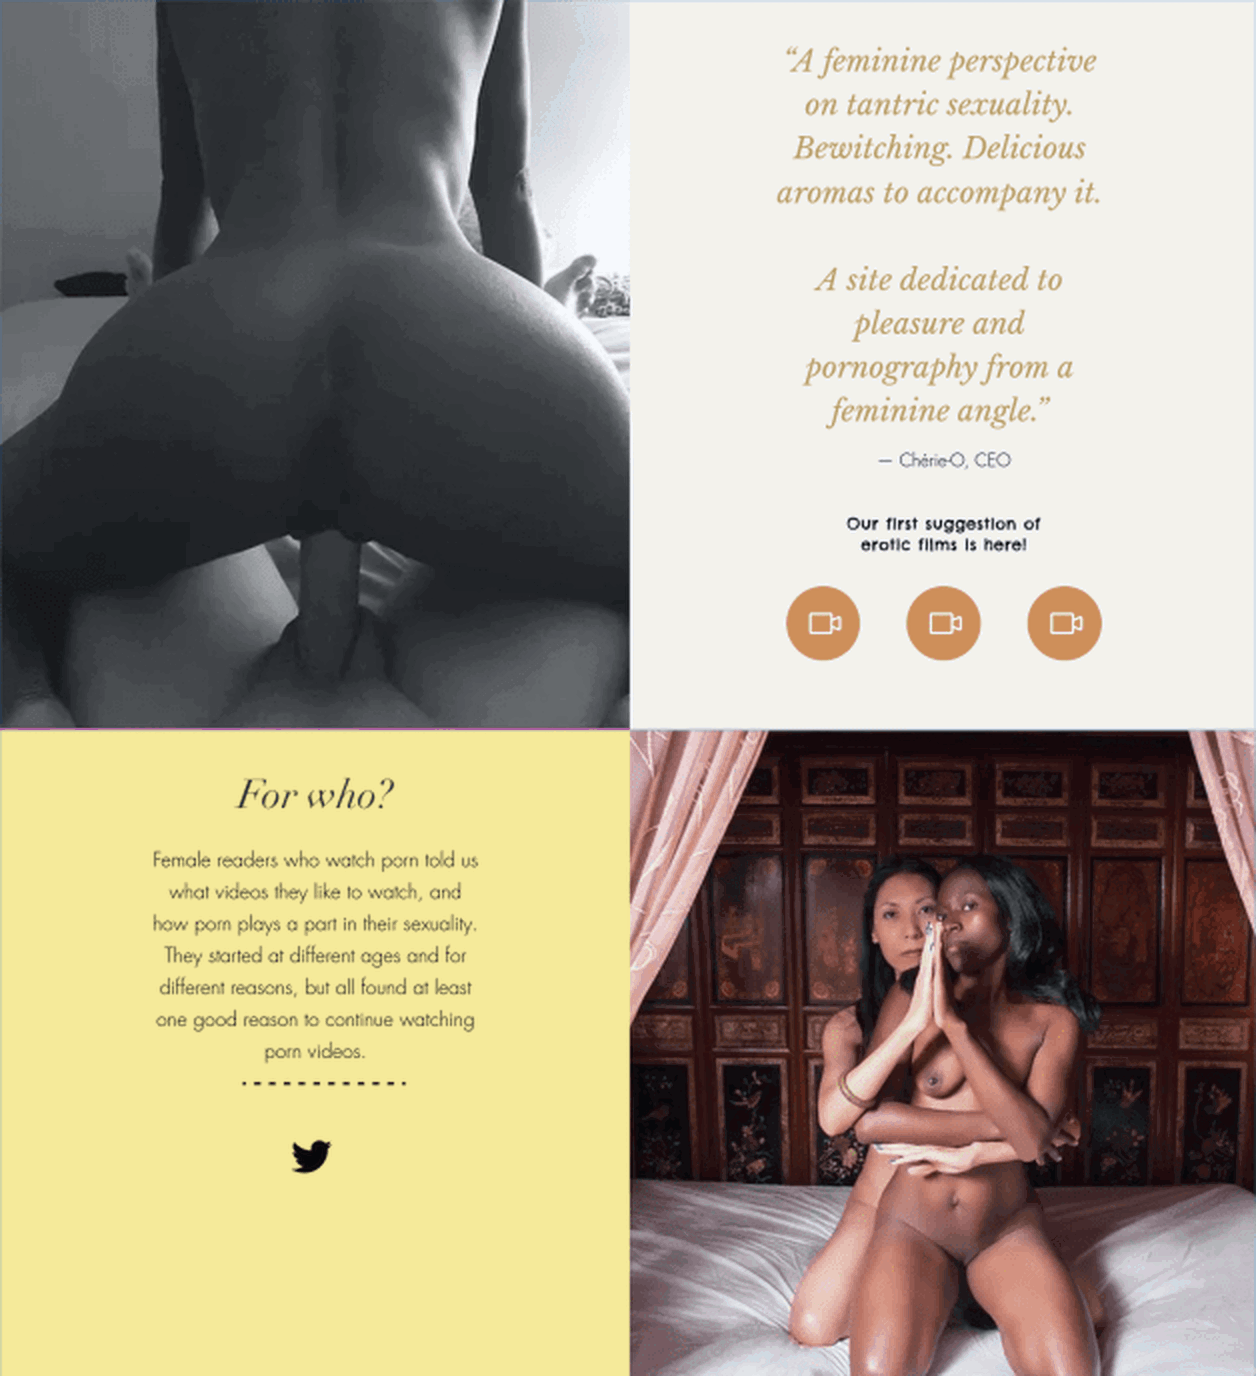 Watch the Photo by bonjour TanTra, by KER with the username @bonjourtantra, who is a verified user, posted on September 28, 2023. The post is about the topic Tantric sexuality. and the text says 'bonjour 🆃an🆃ra 🦜

#quote "Every day we sleep with men and women we don't love, and we don't sleep nor have sex with women and men we do love"

📣 Your thoughts?'